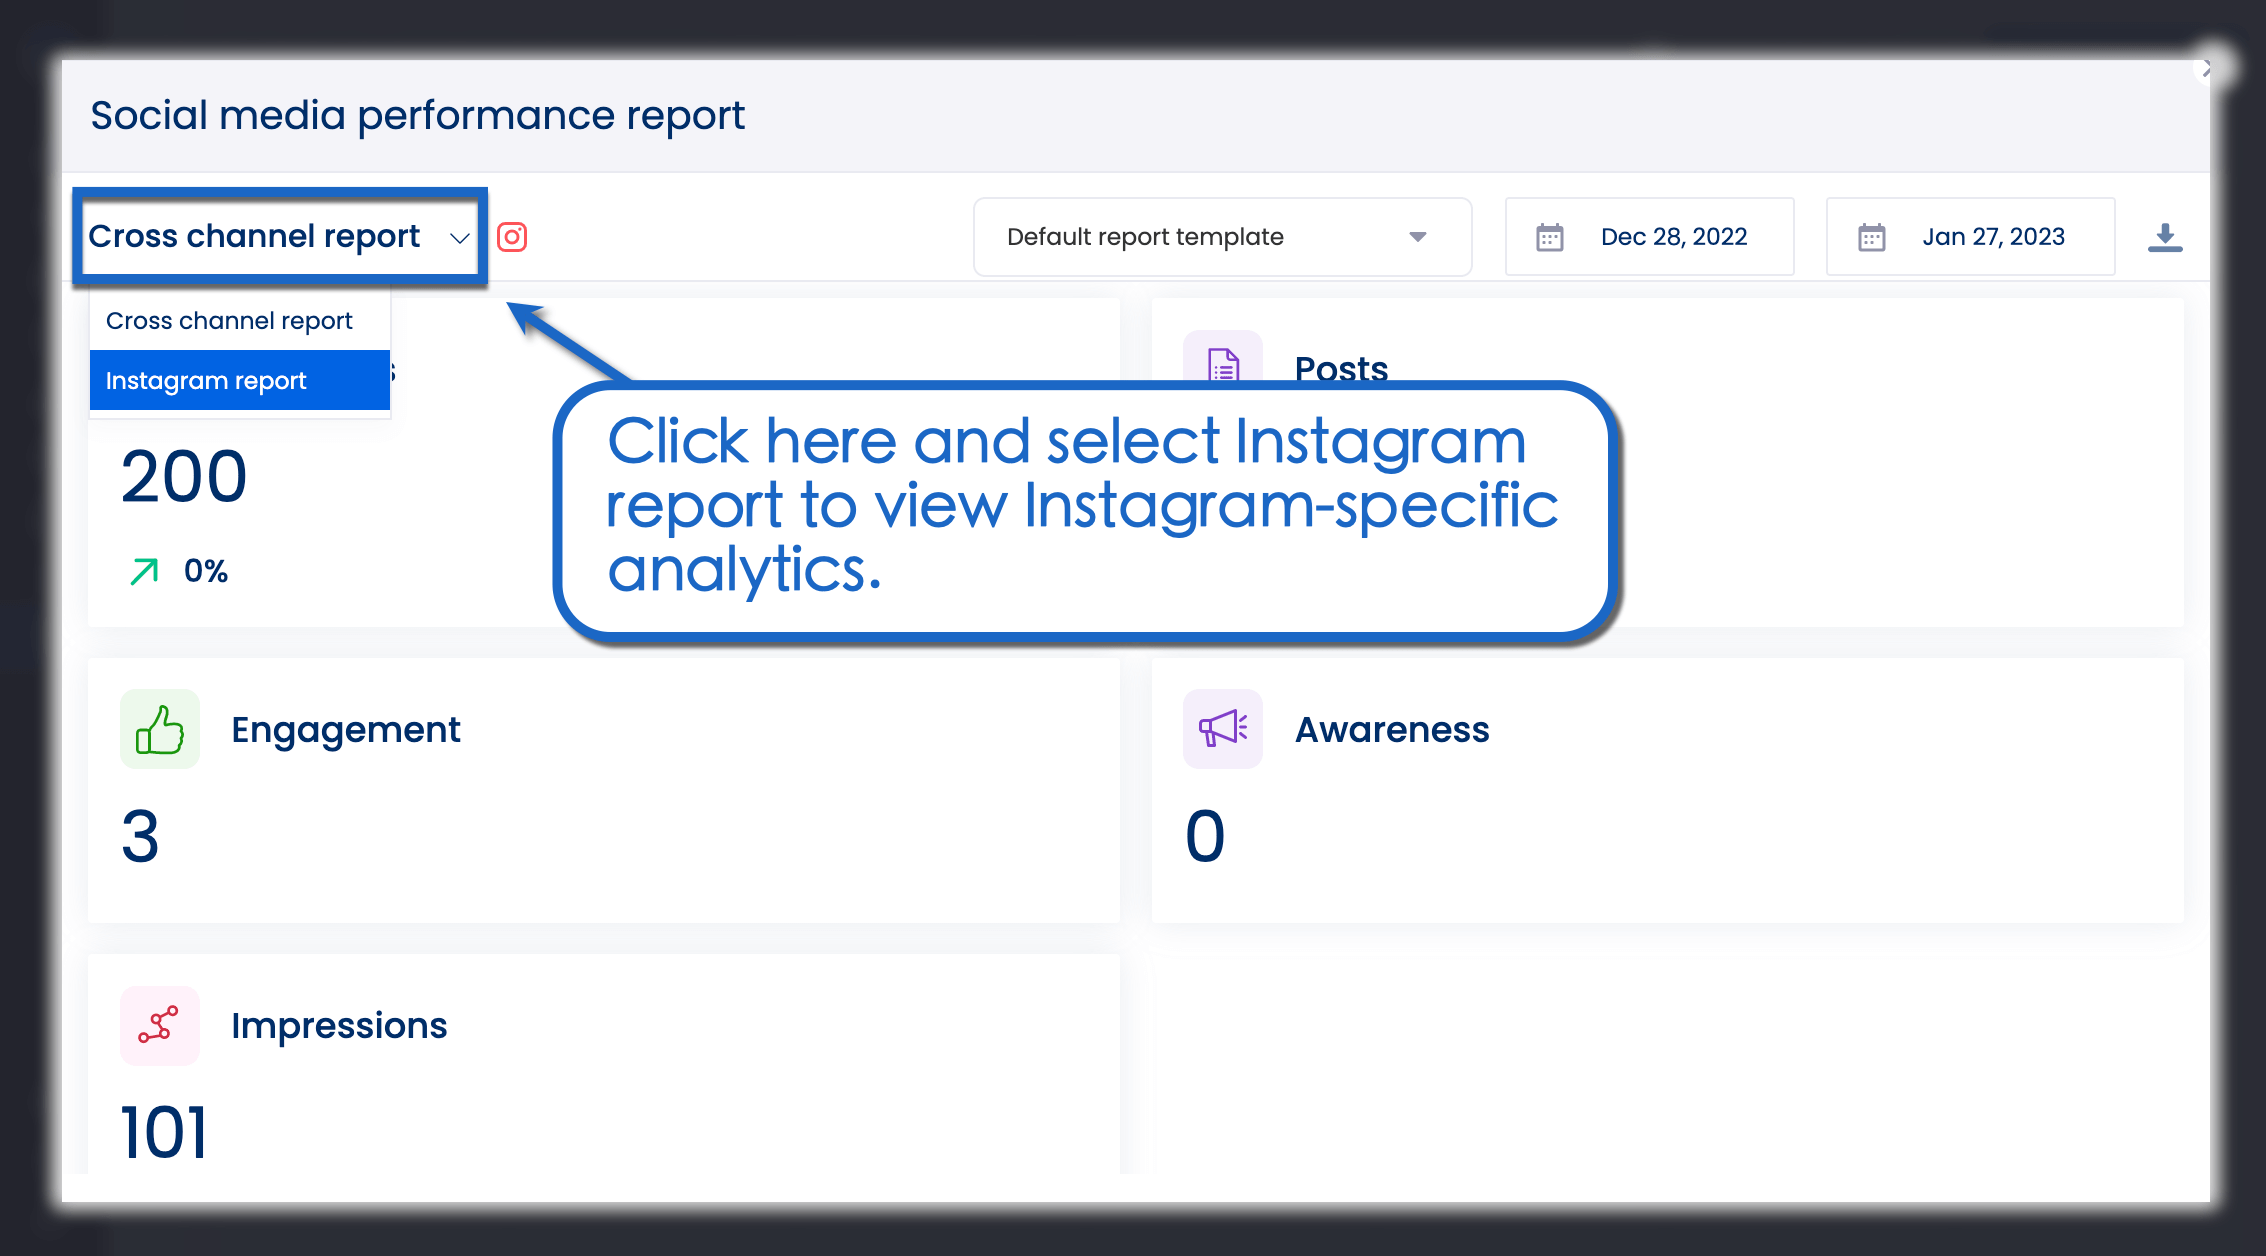 Analyze your Instagram profile specifically through cross channel report.